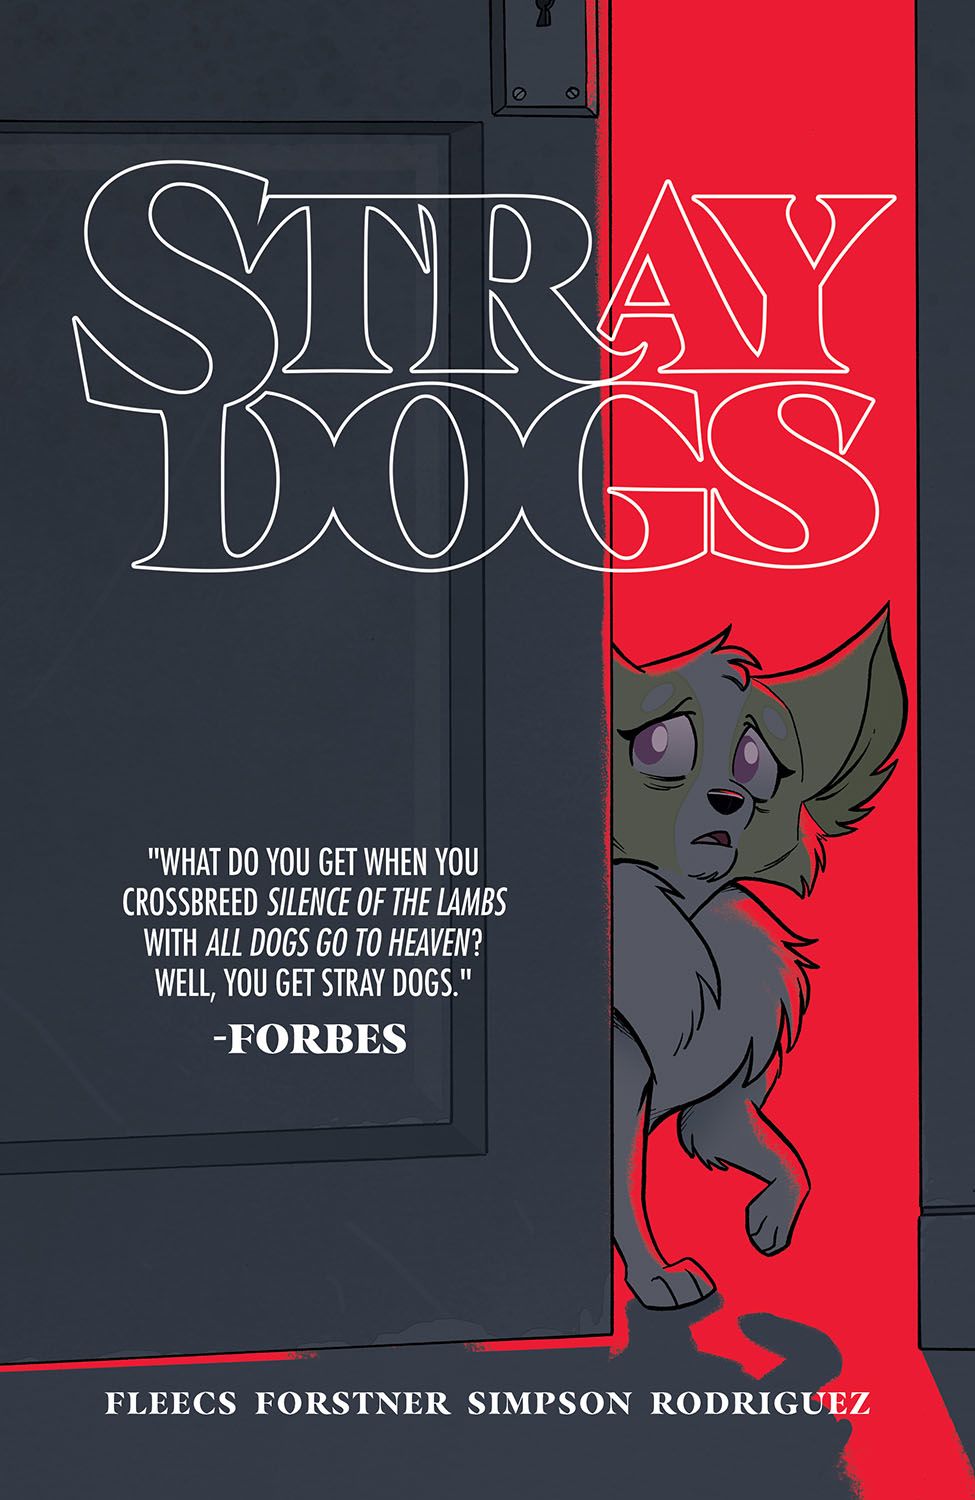 Sophie peers around a door on the cover of Stray Dogs